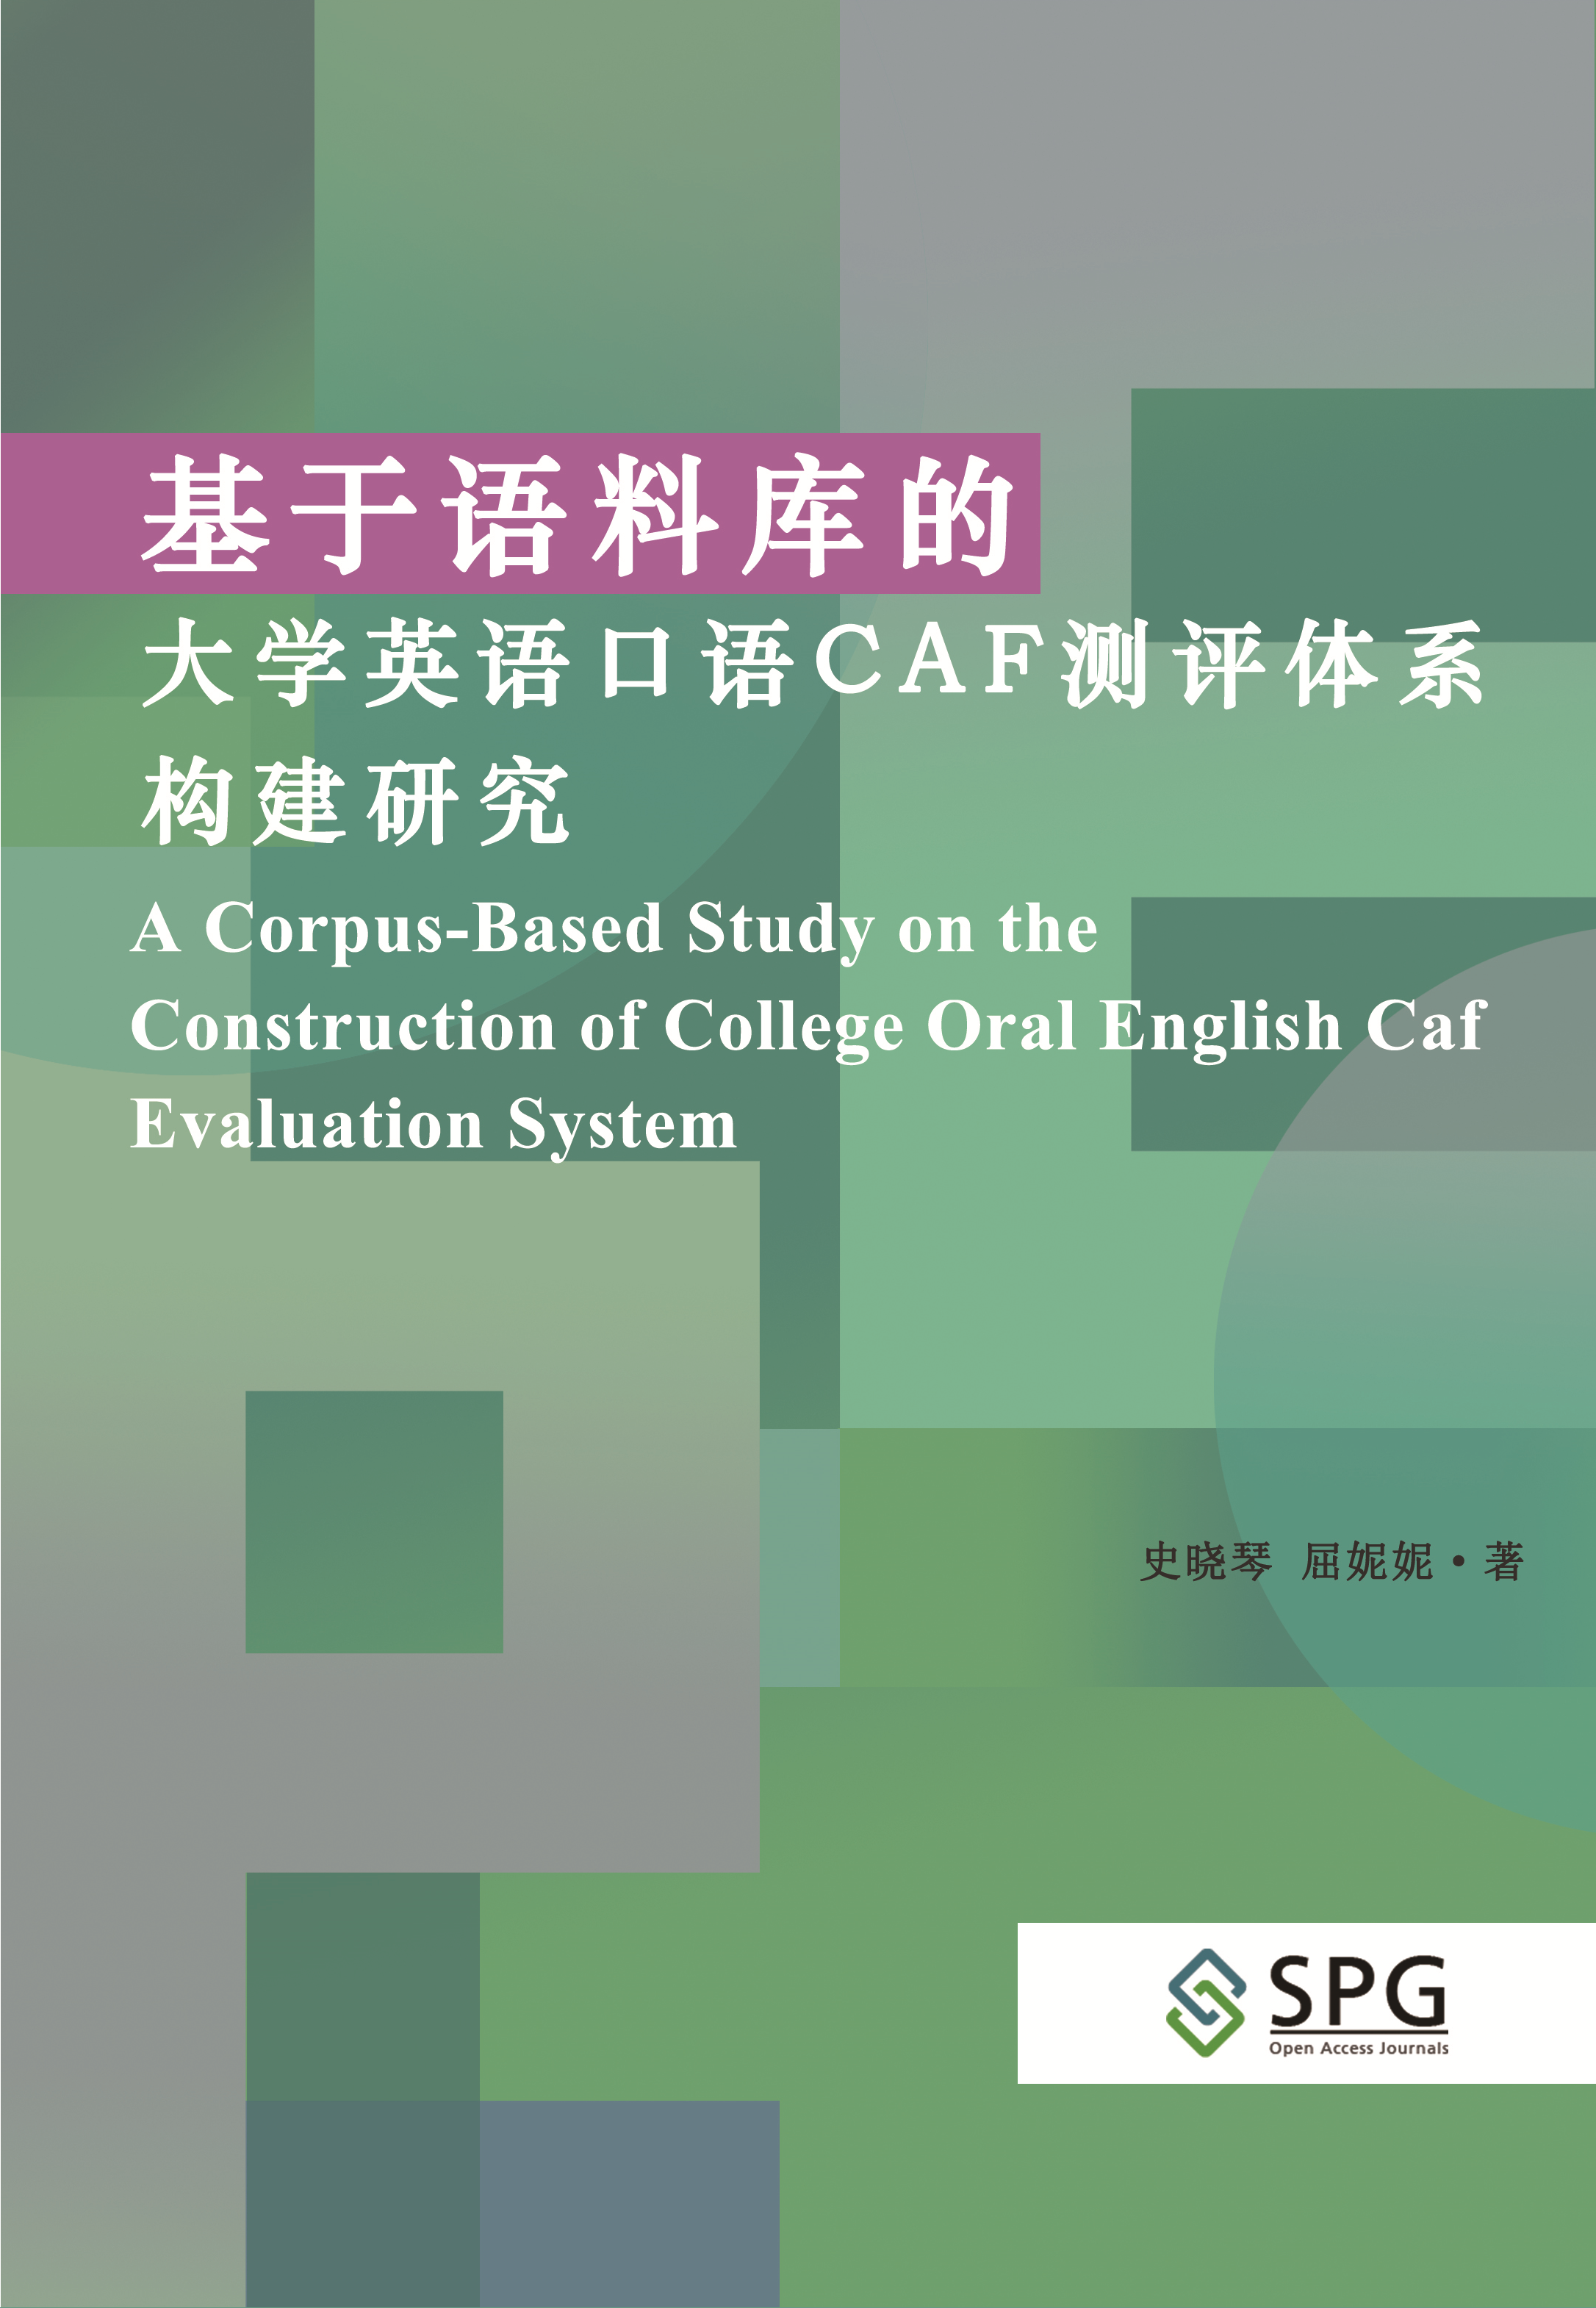 A Corpus-Based Study on the Construction of College Oral English Caf Evaluation System | Scholar Publishing Group